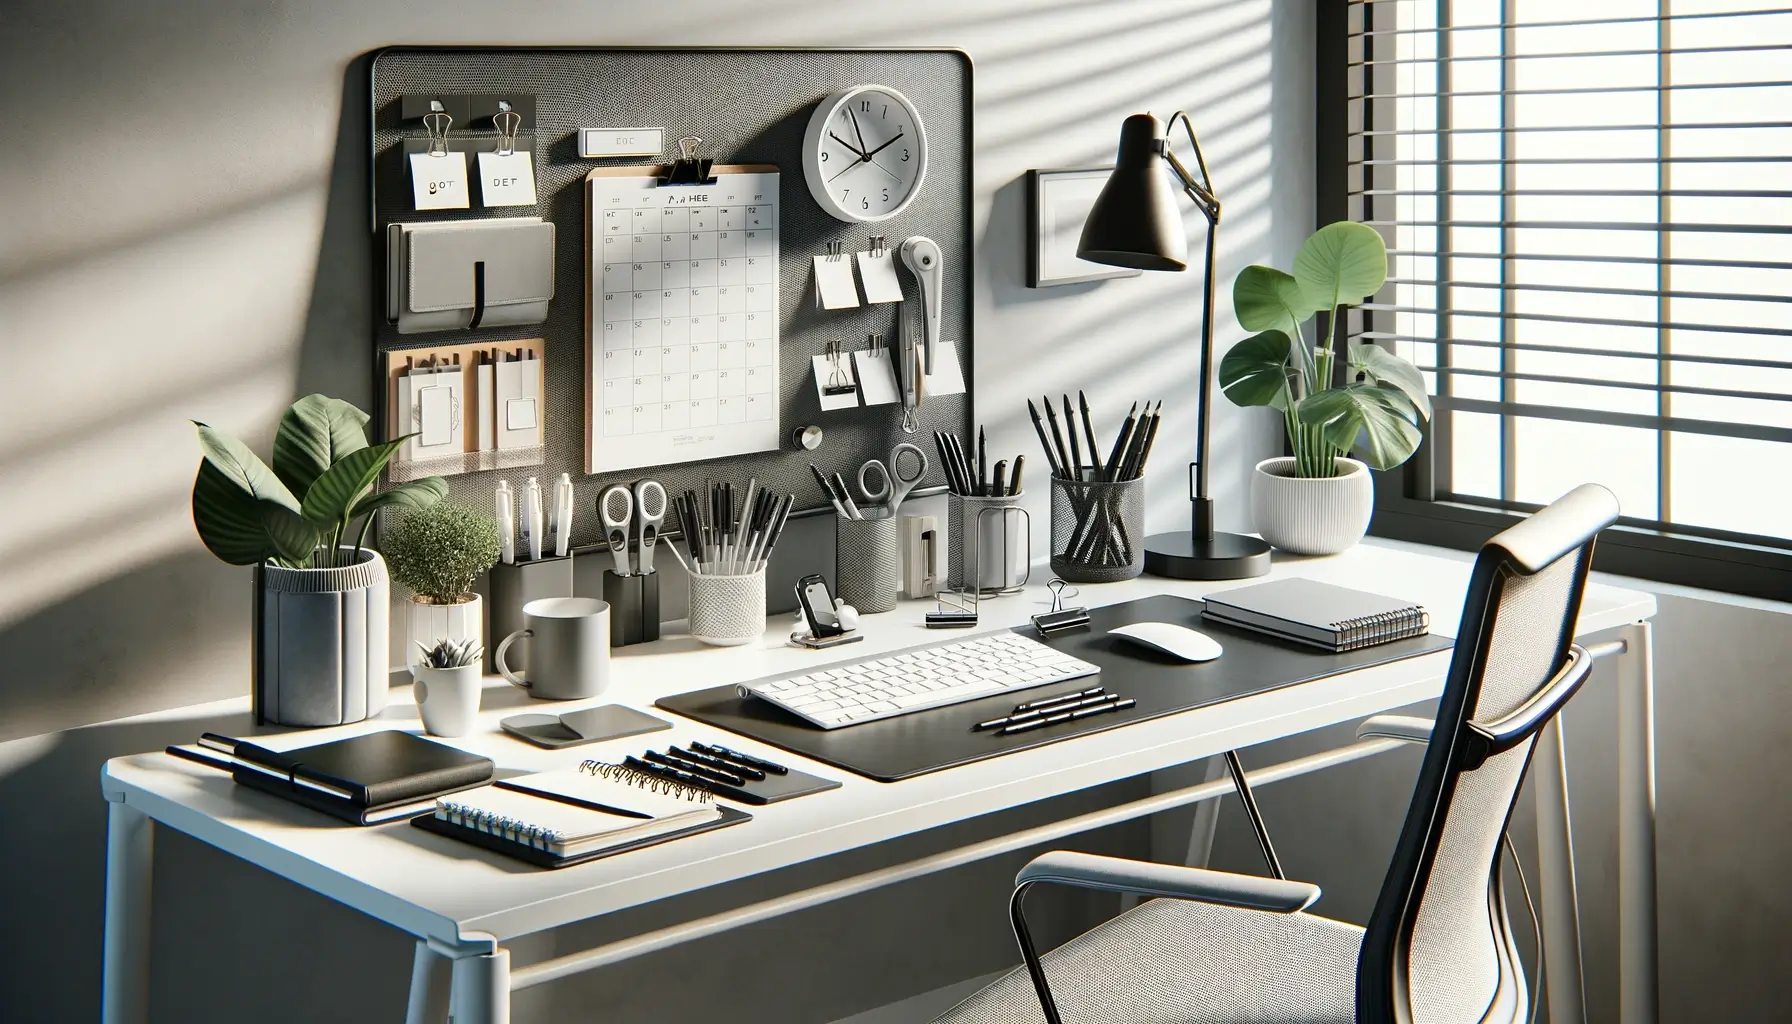 A neatly organized modern office desk with essential supplies including a calendar, plants, stationery, an ergonomic chair, and a computer keyboard, all bathed in natural light from a window with blinds.